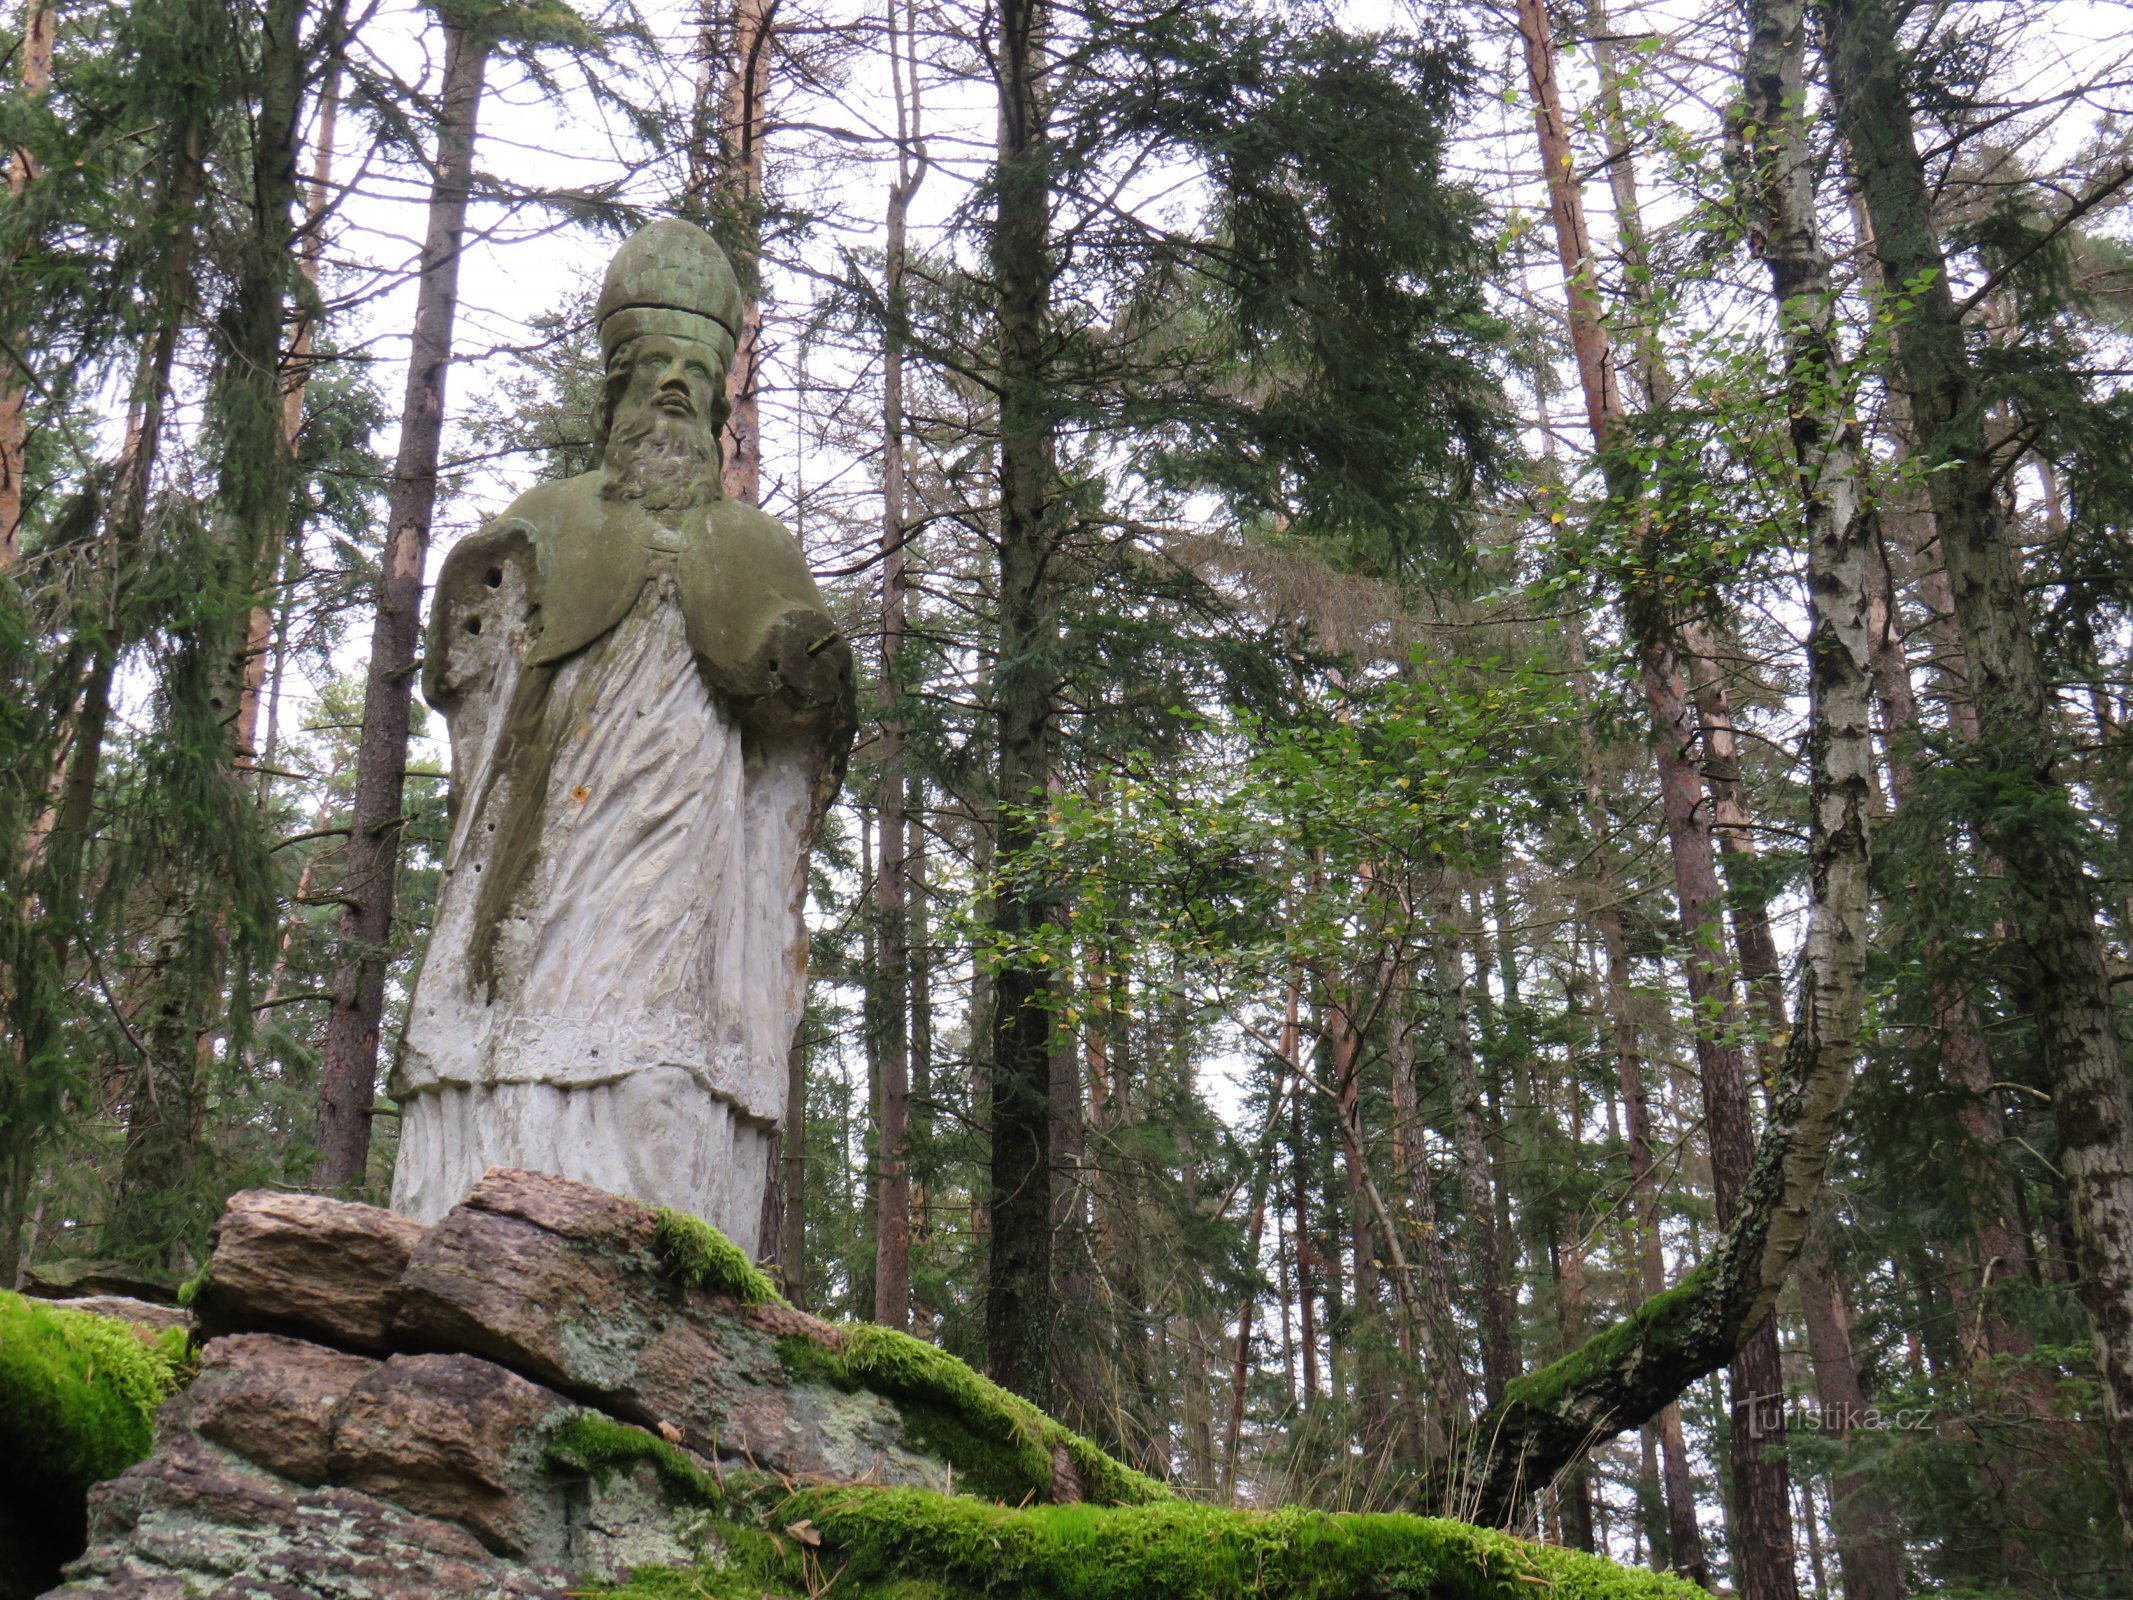 The search for the statue of St. Stanislav at Osik